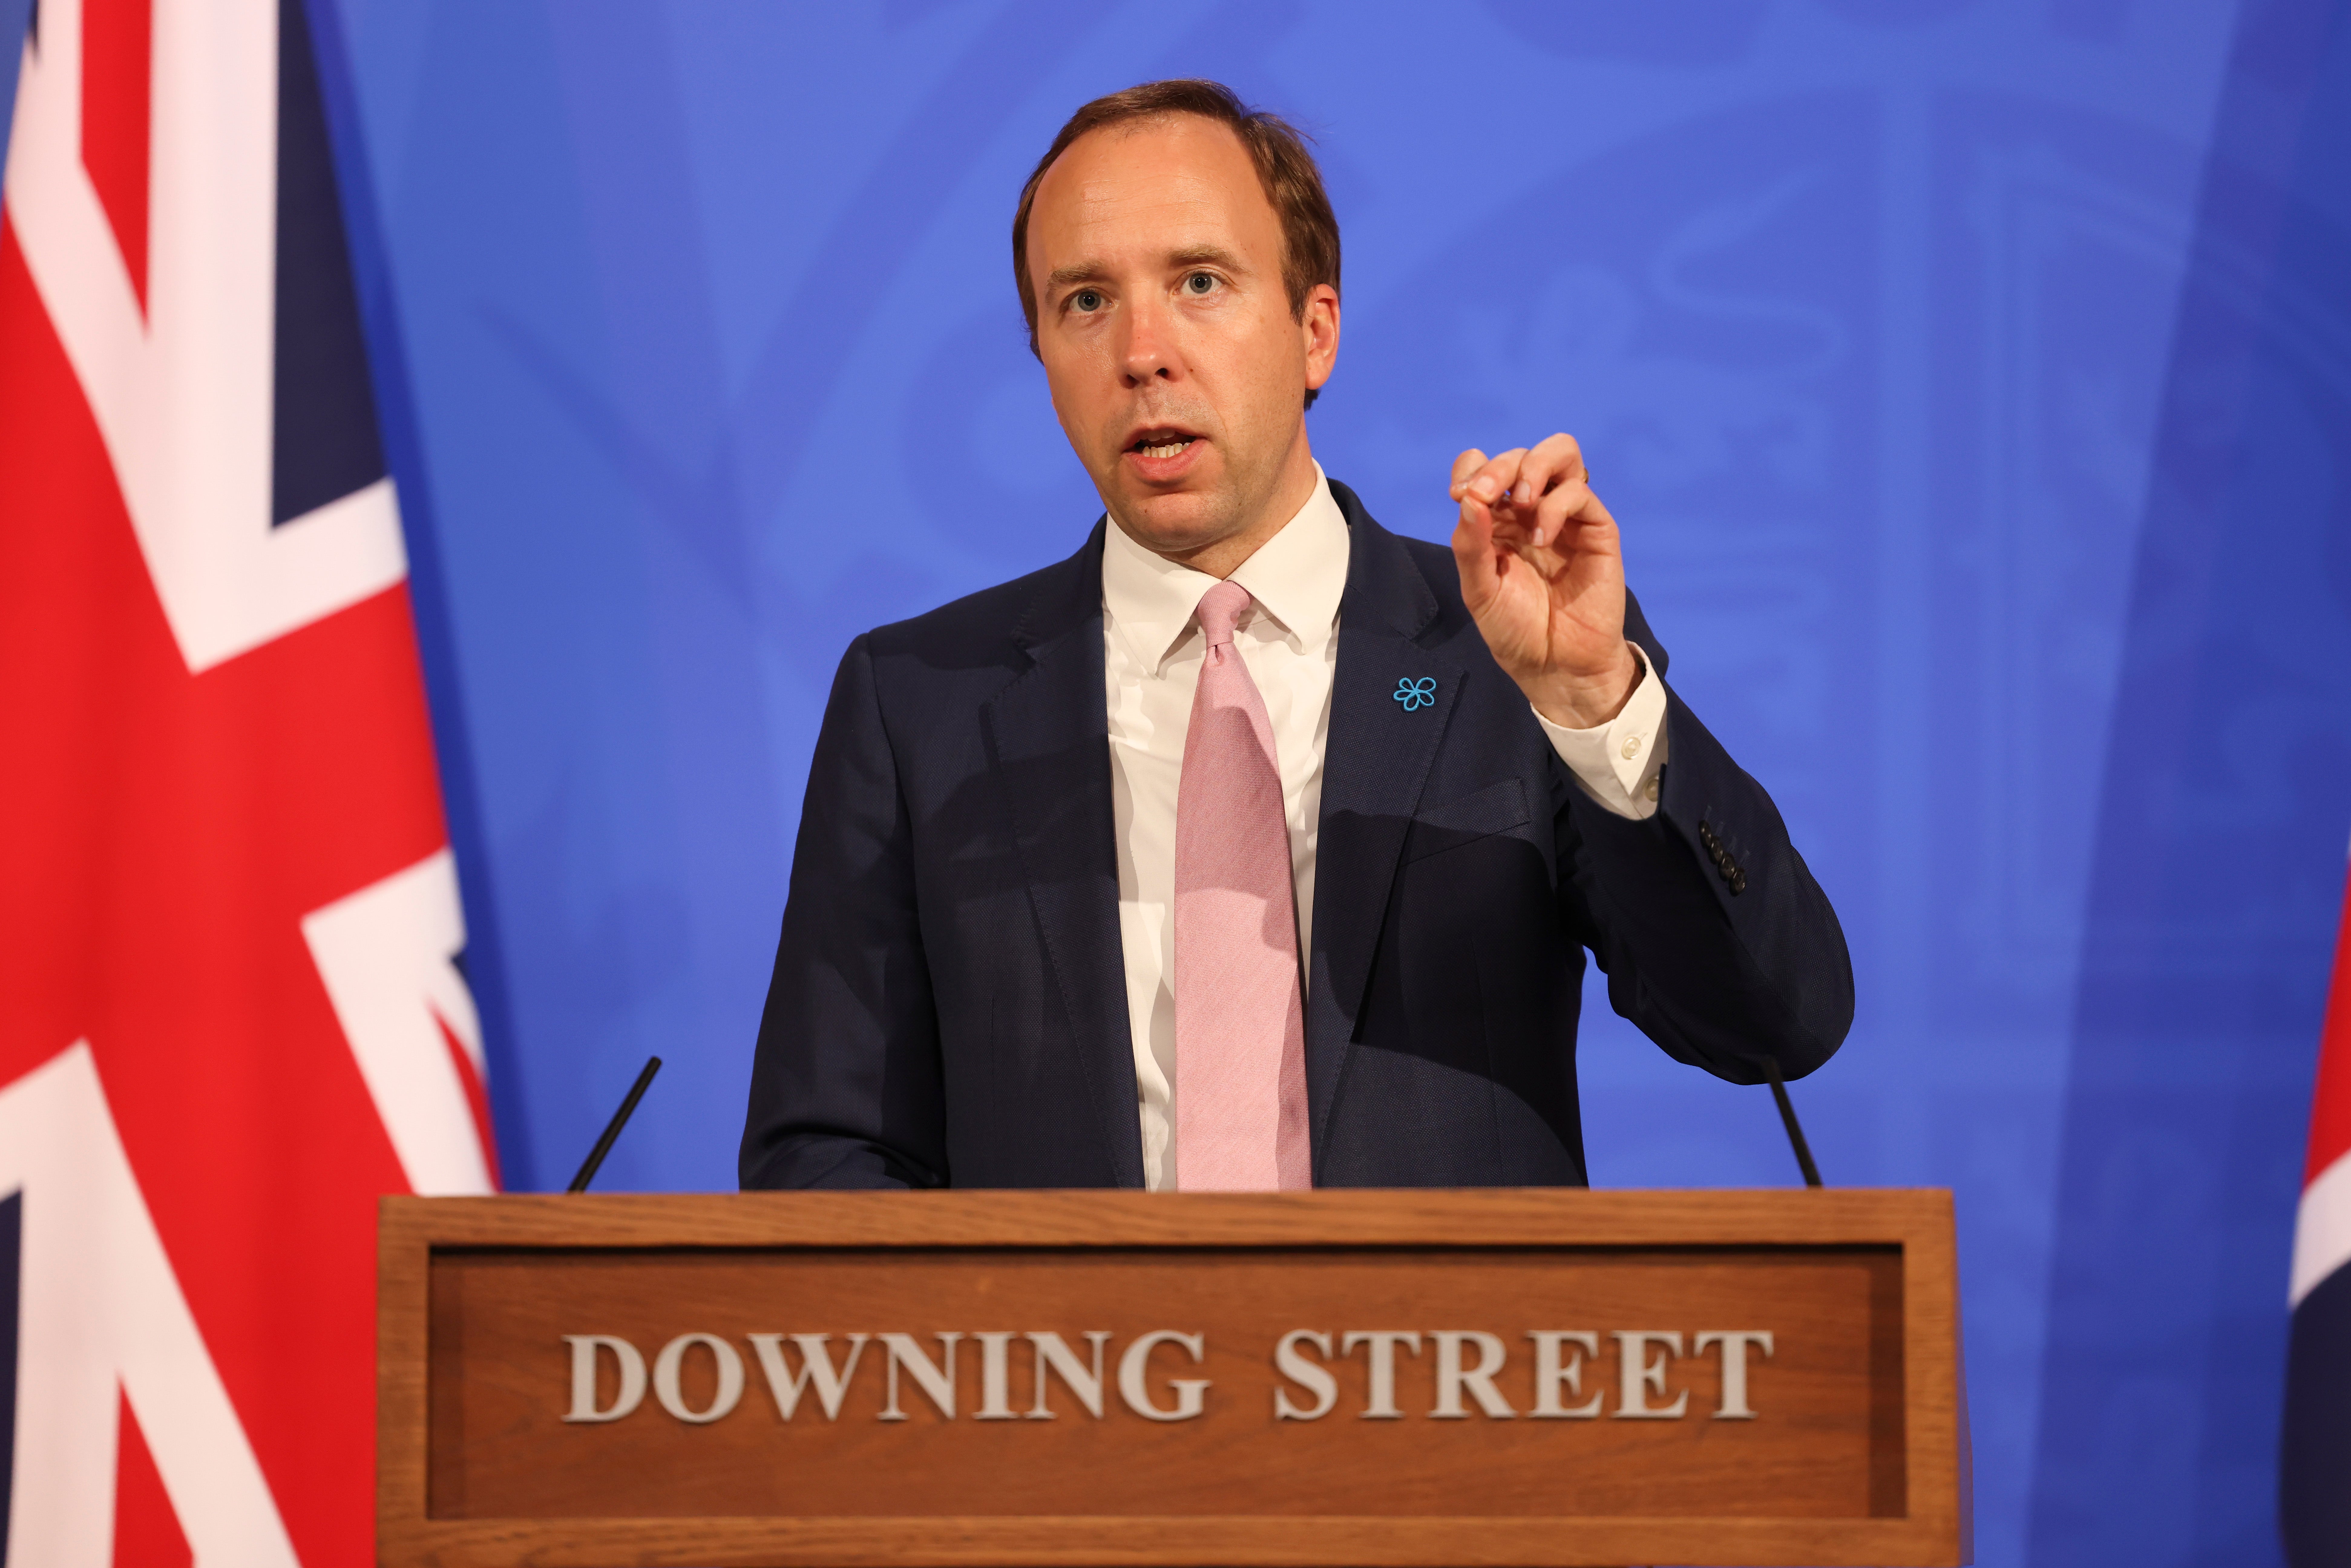 Matt Hancock, the health secretary at the time of the care homes decision